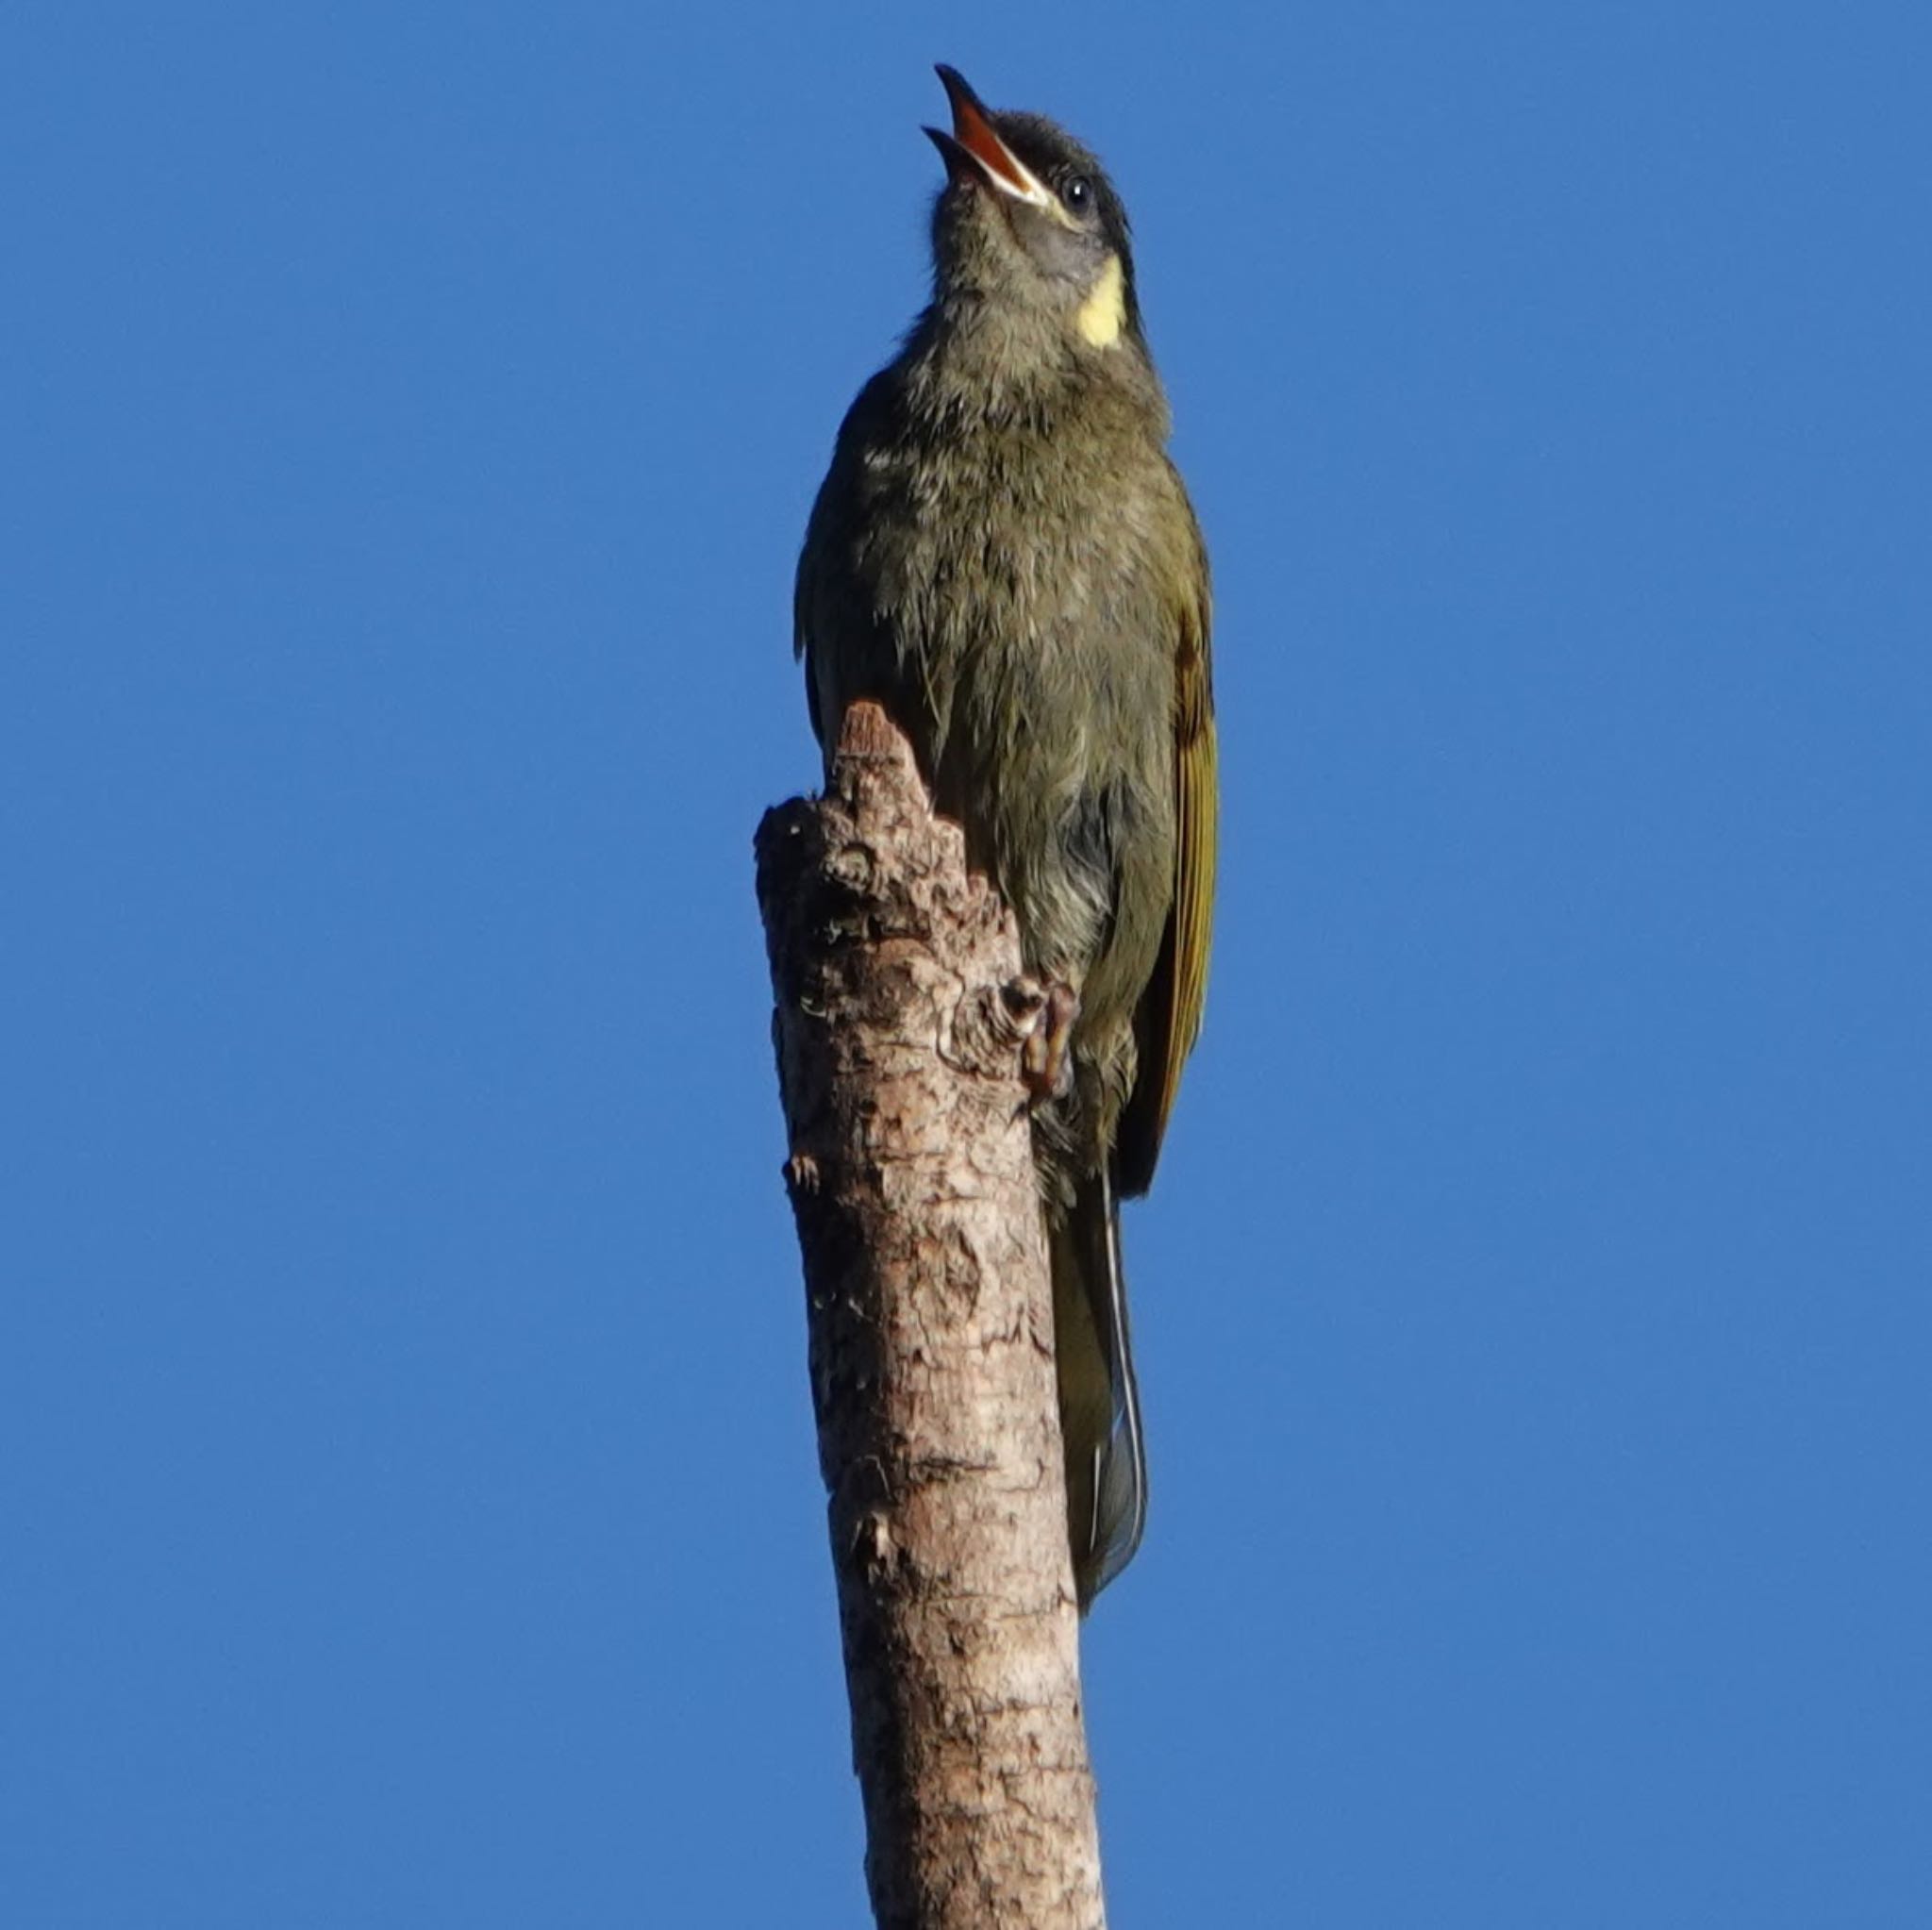 Photo of Lewin's Honeyeater at Ourimbah Rest Stop, Ourimbah, NSW, Australia by Maki